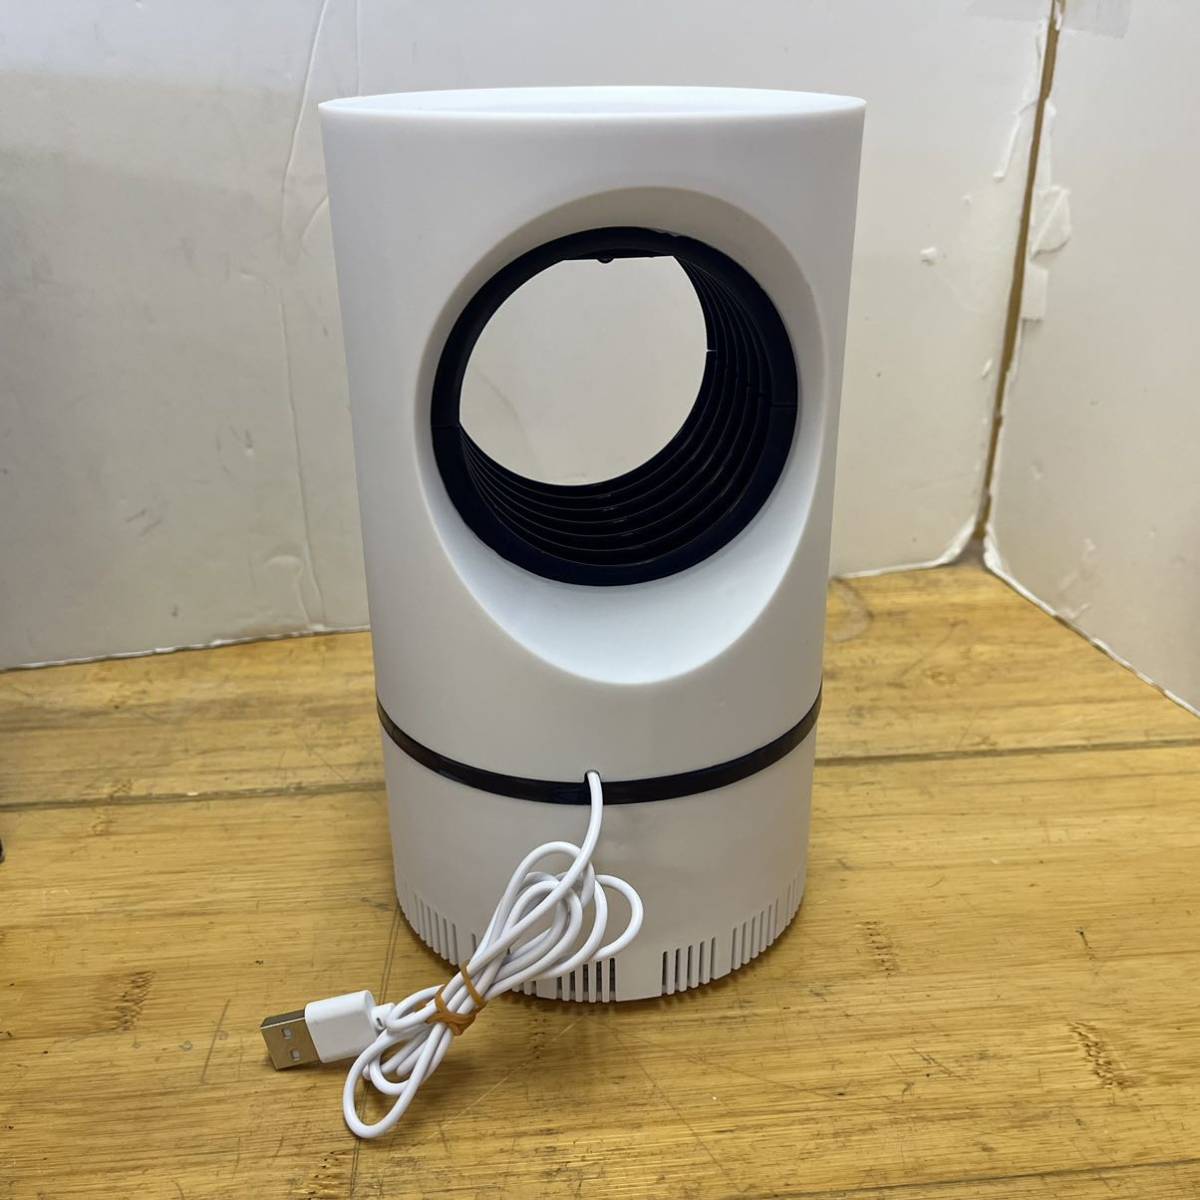 [ used including carriage ] Fuji made . Me. mosquito repellent photocatalyst suction mosquito repellent vessel LED light USB power supply owner manual attaching origin boxed electro- through OK less . smoke less smell less *M0349